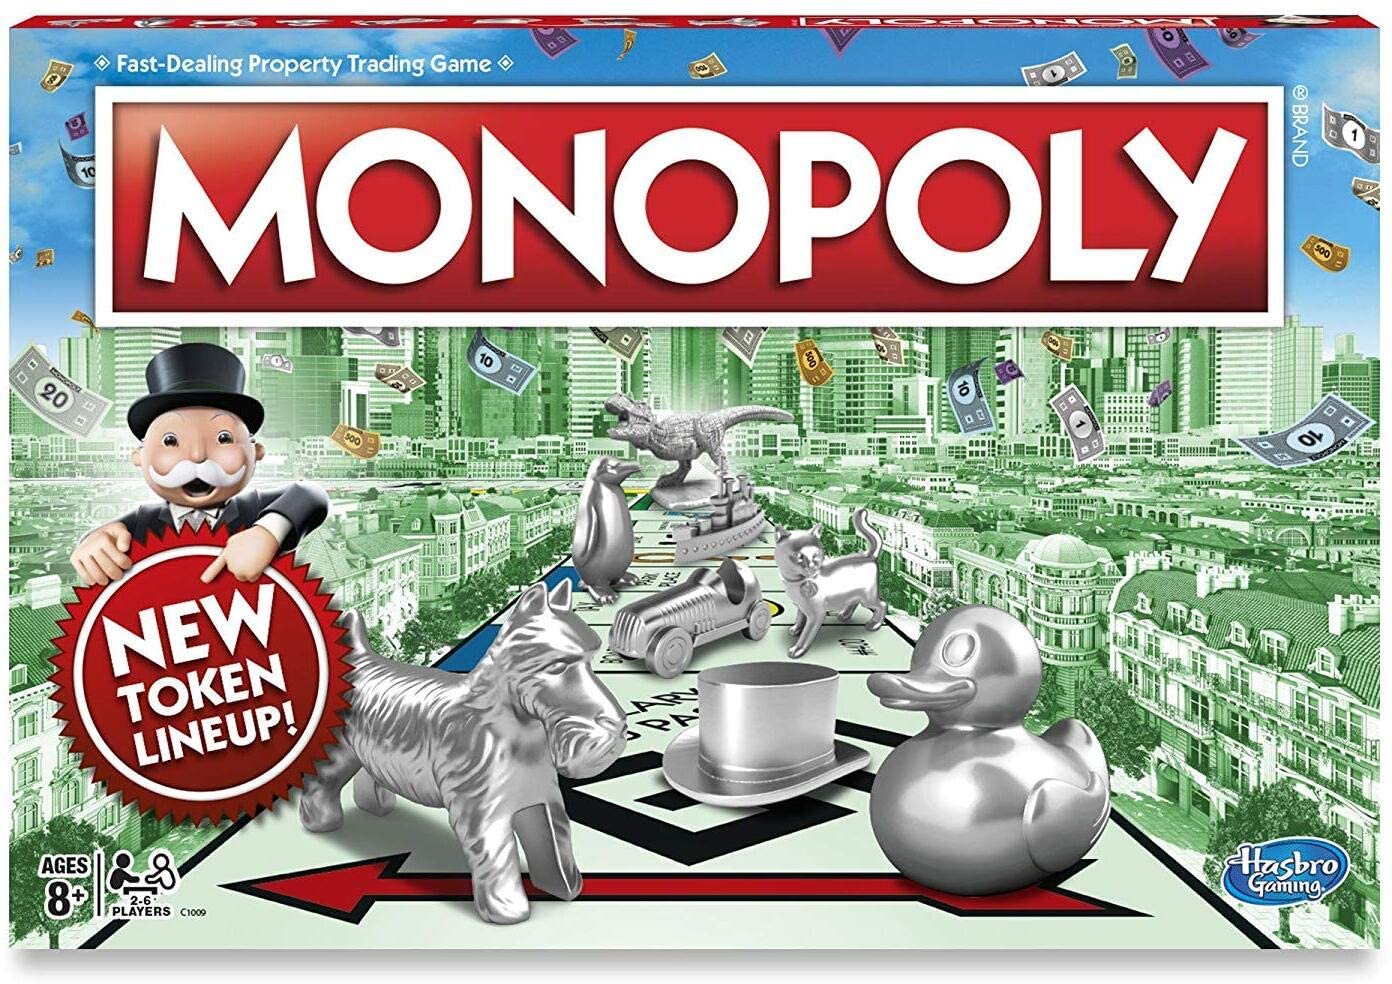 great multi-player games - fun multi-player video games - Monopoly